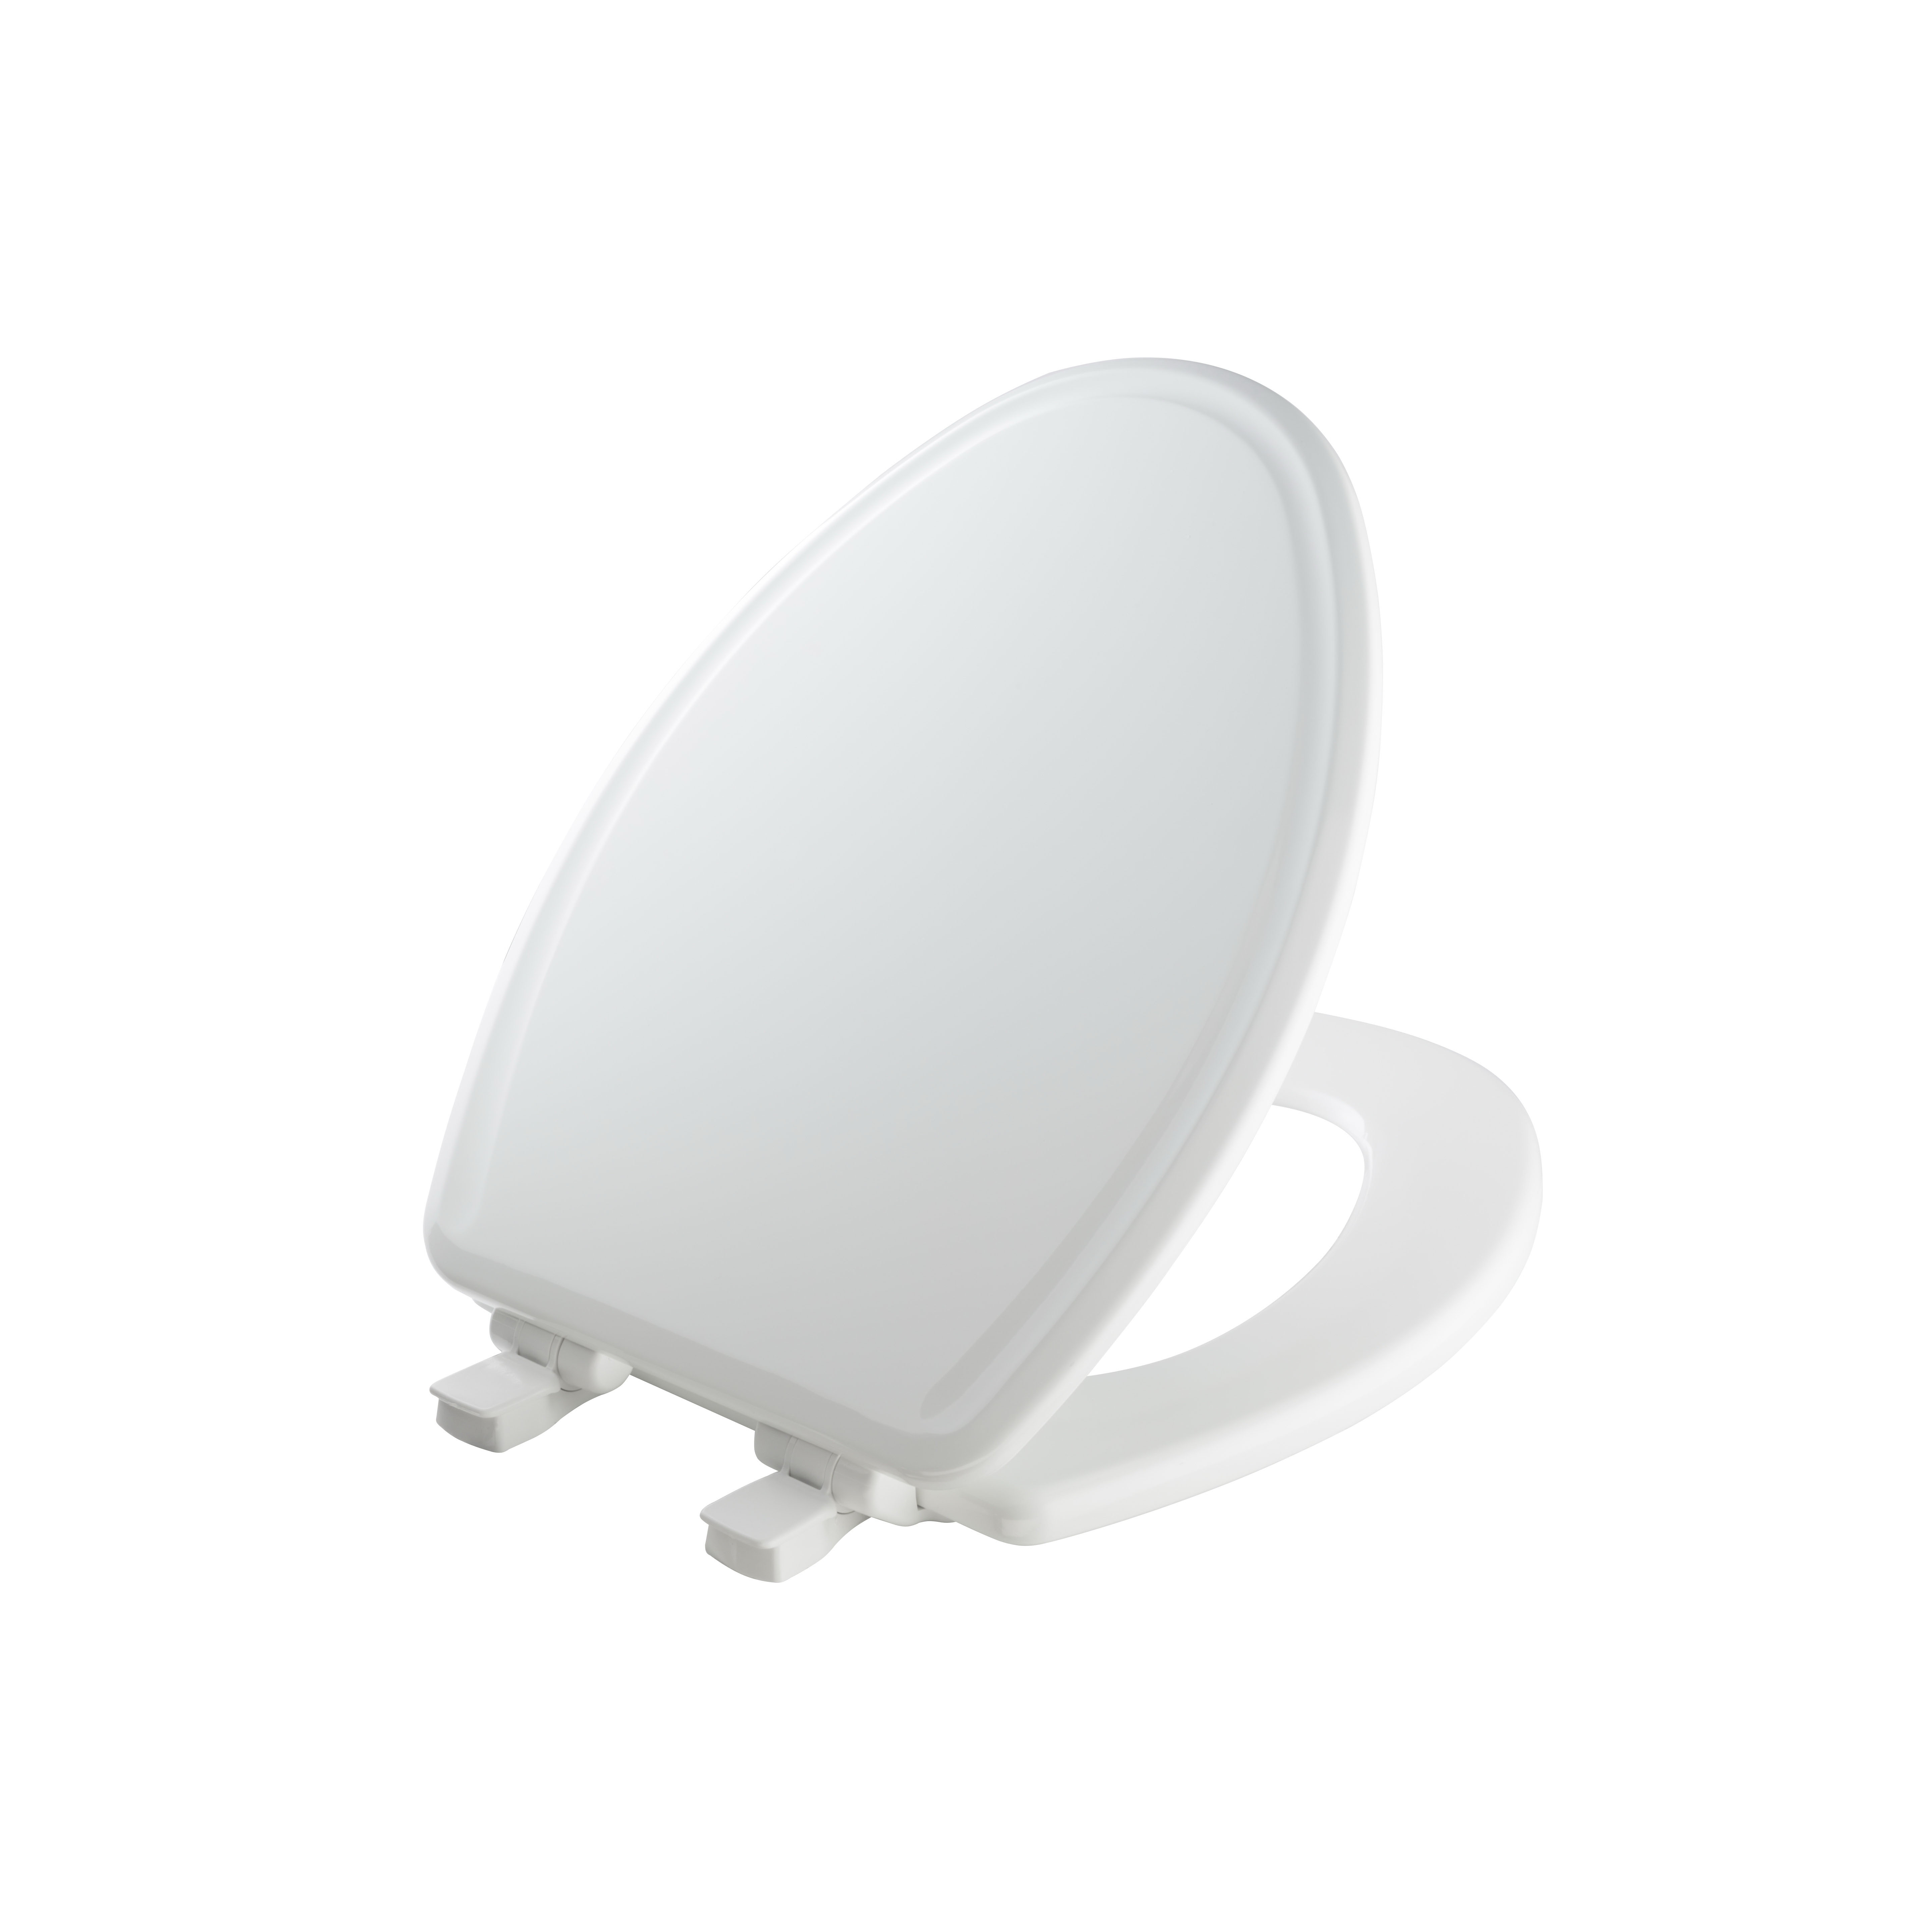 148SLOW-000 Toilet Seat with Cover, Elongated, Molded Wood, White, STA-TITE, Whisper Close Hinge